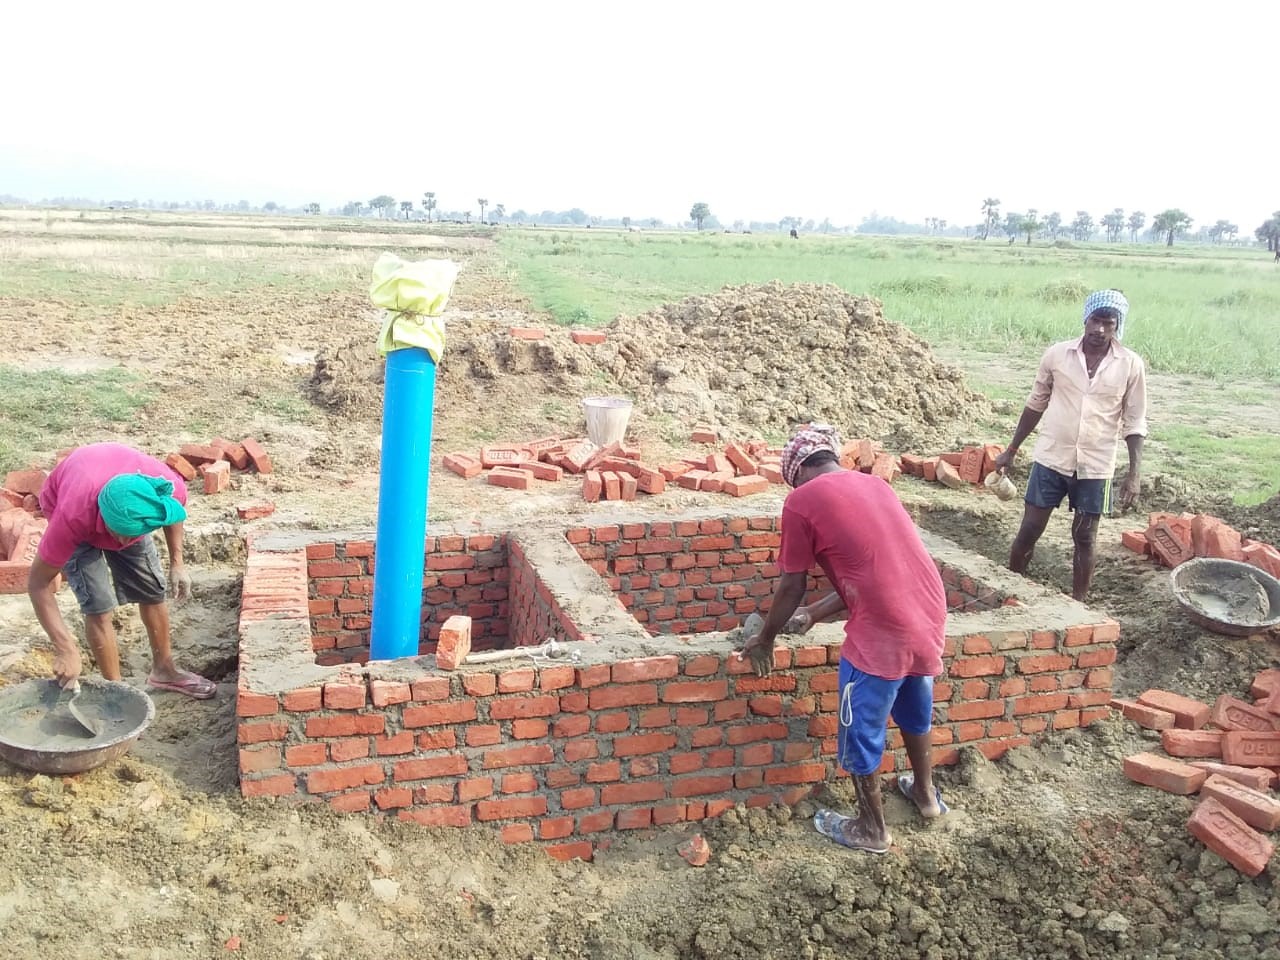 Construction of the new Aquifer Storage and Recovery system in South Bihar, which has been developed through an ACIAR-supported project. Photo provided by Nalanda University.